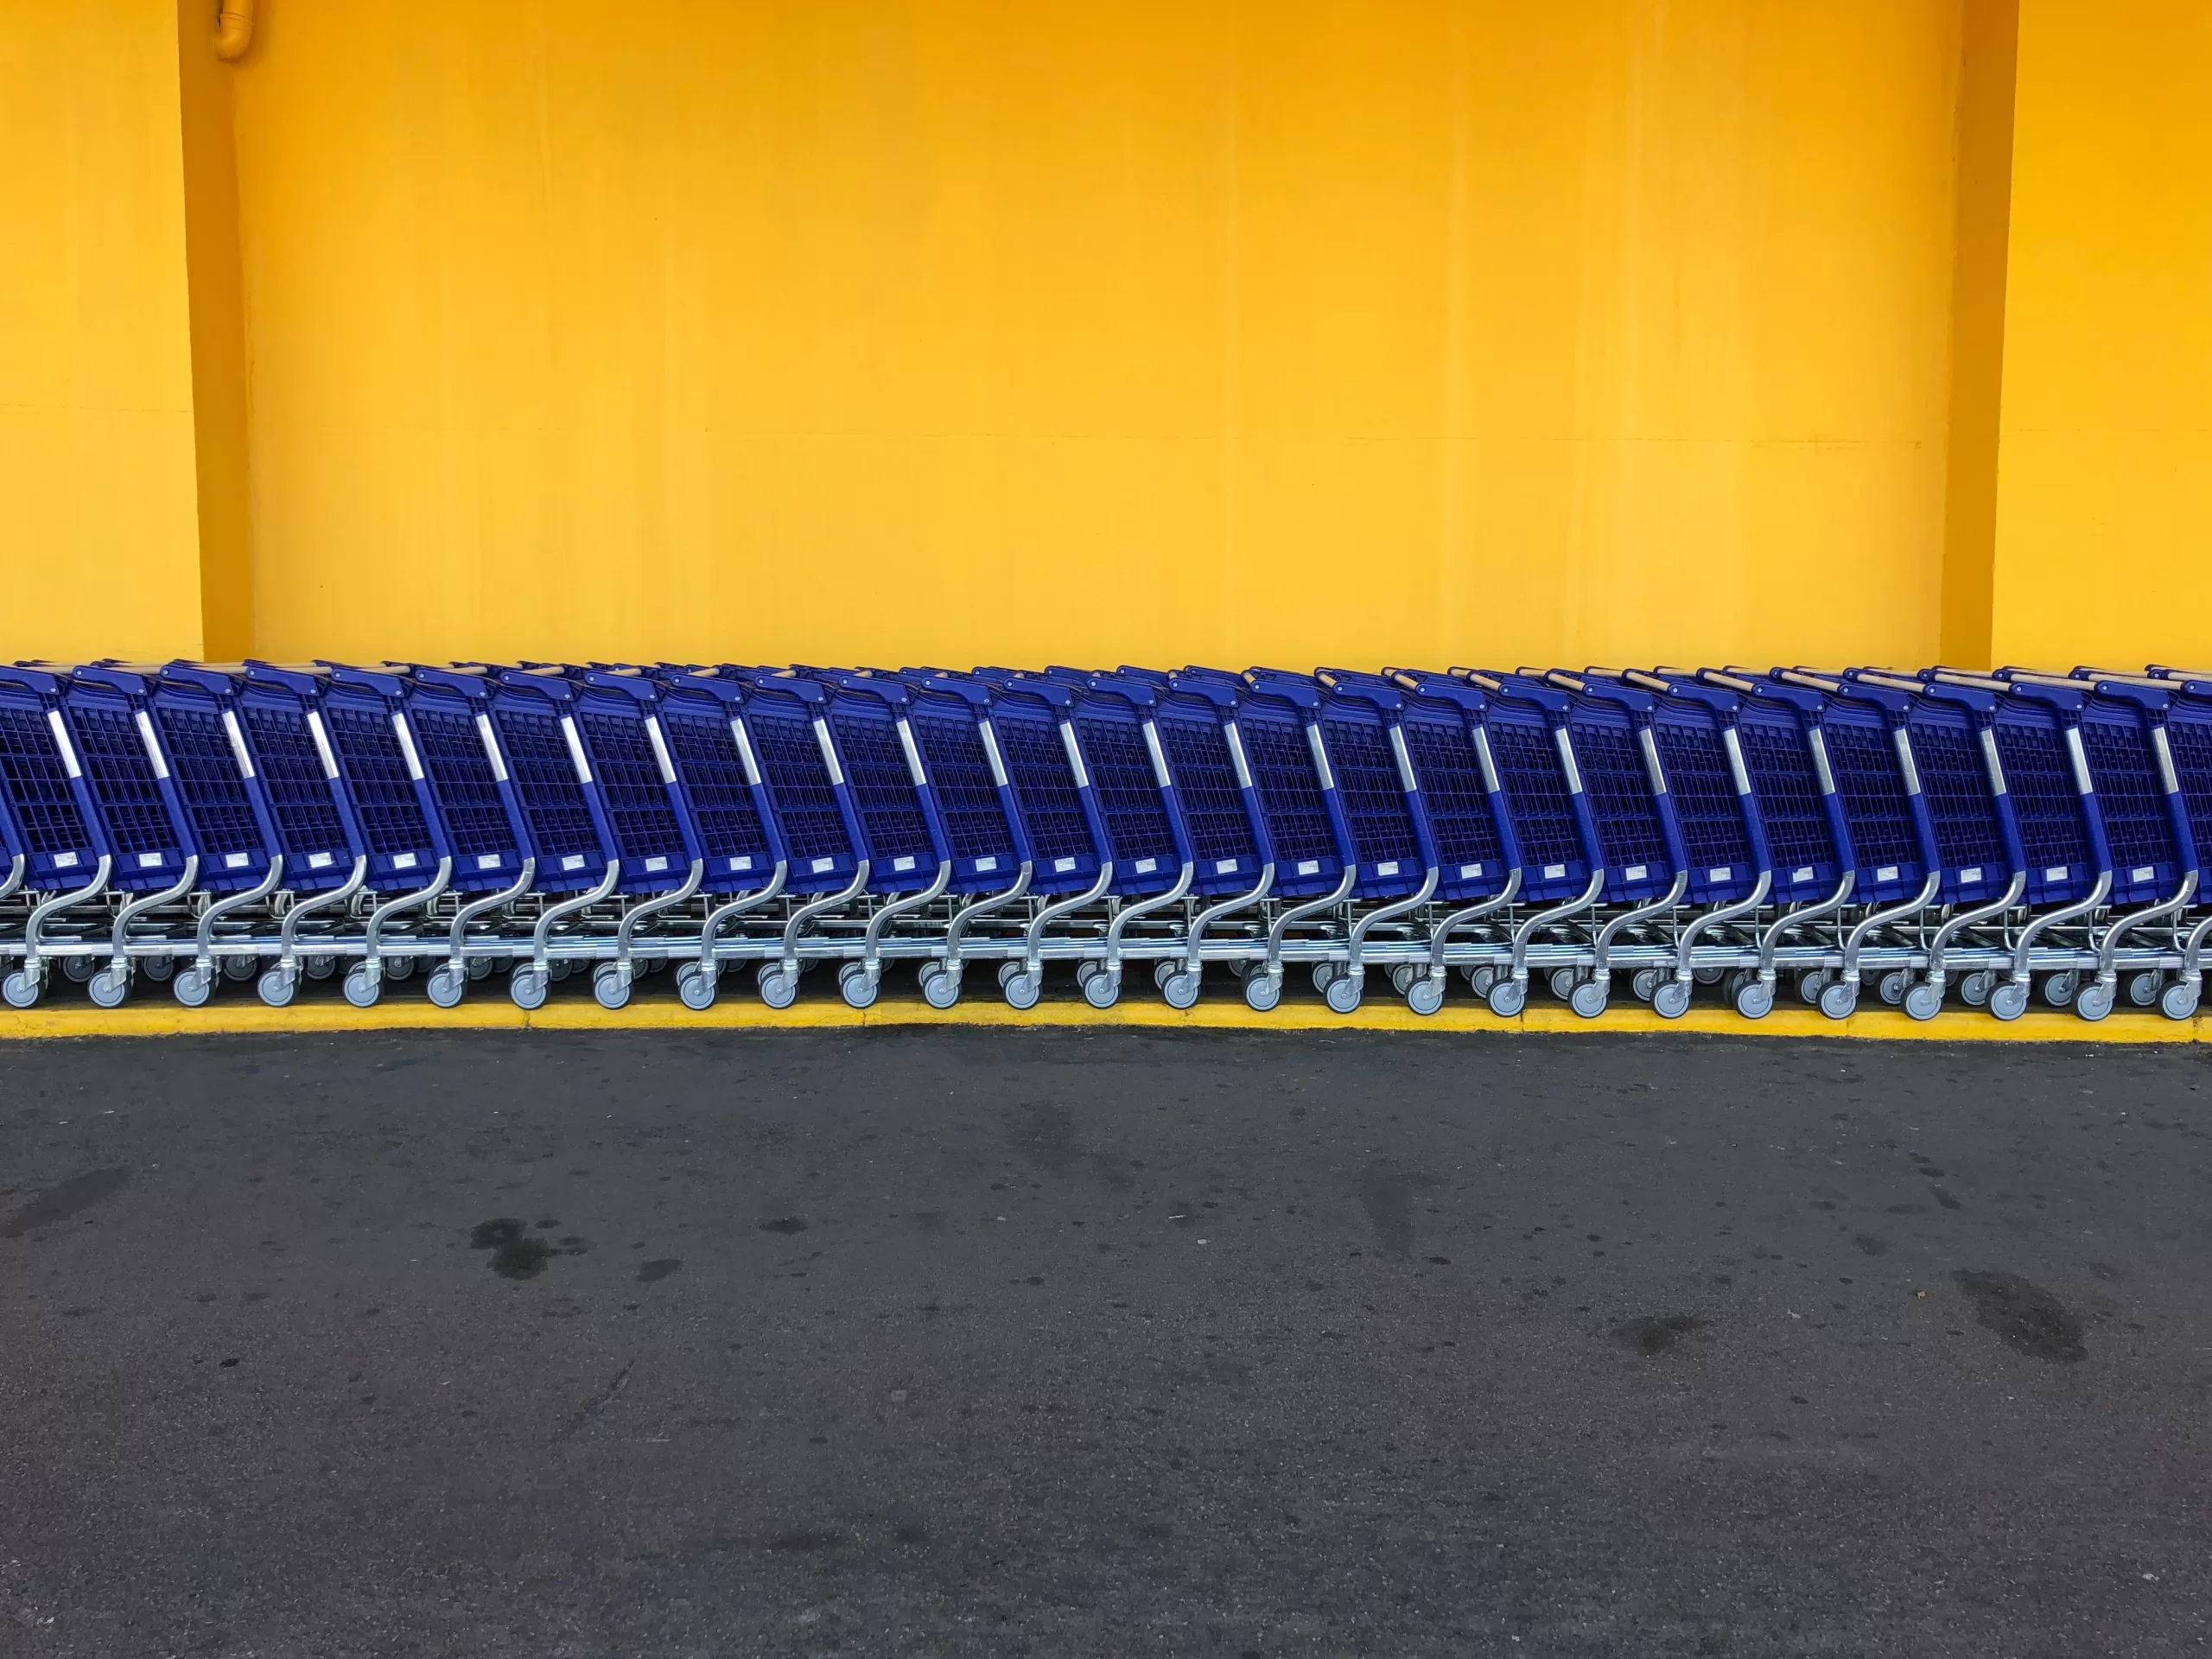 A row of blue shopping carts lined against a bright yellow wall.